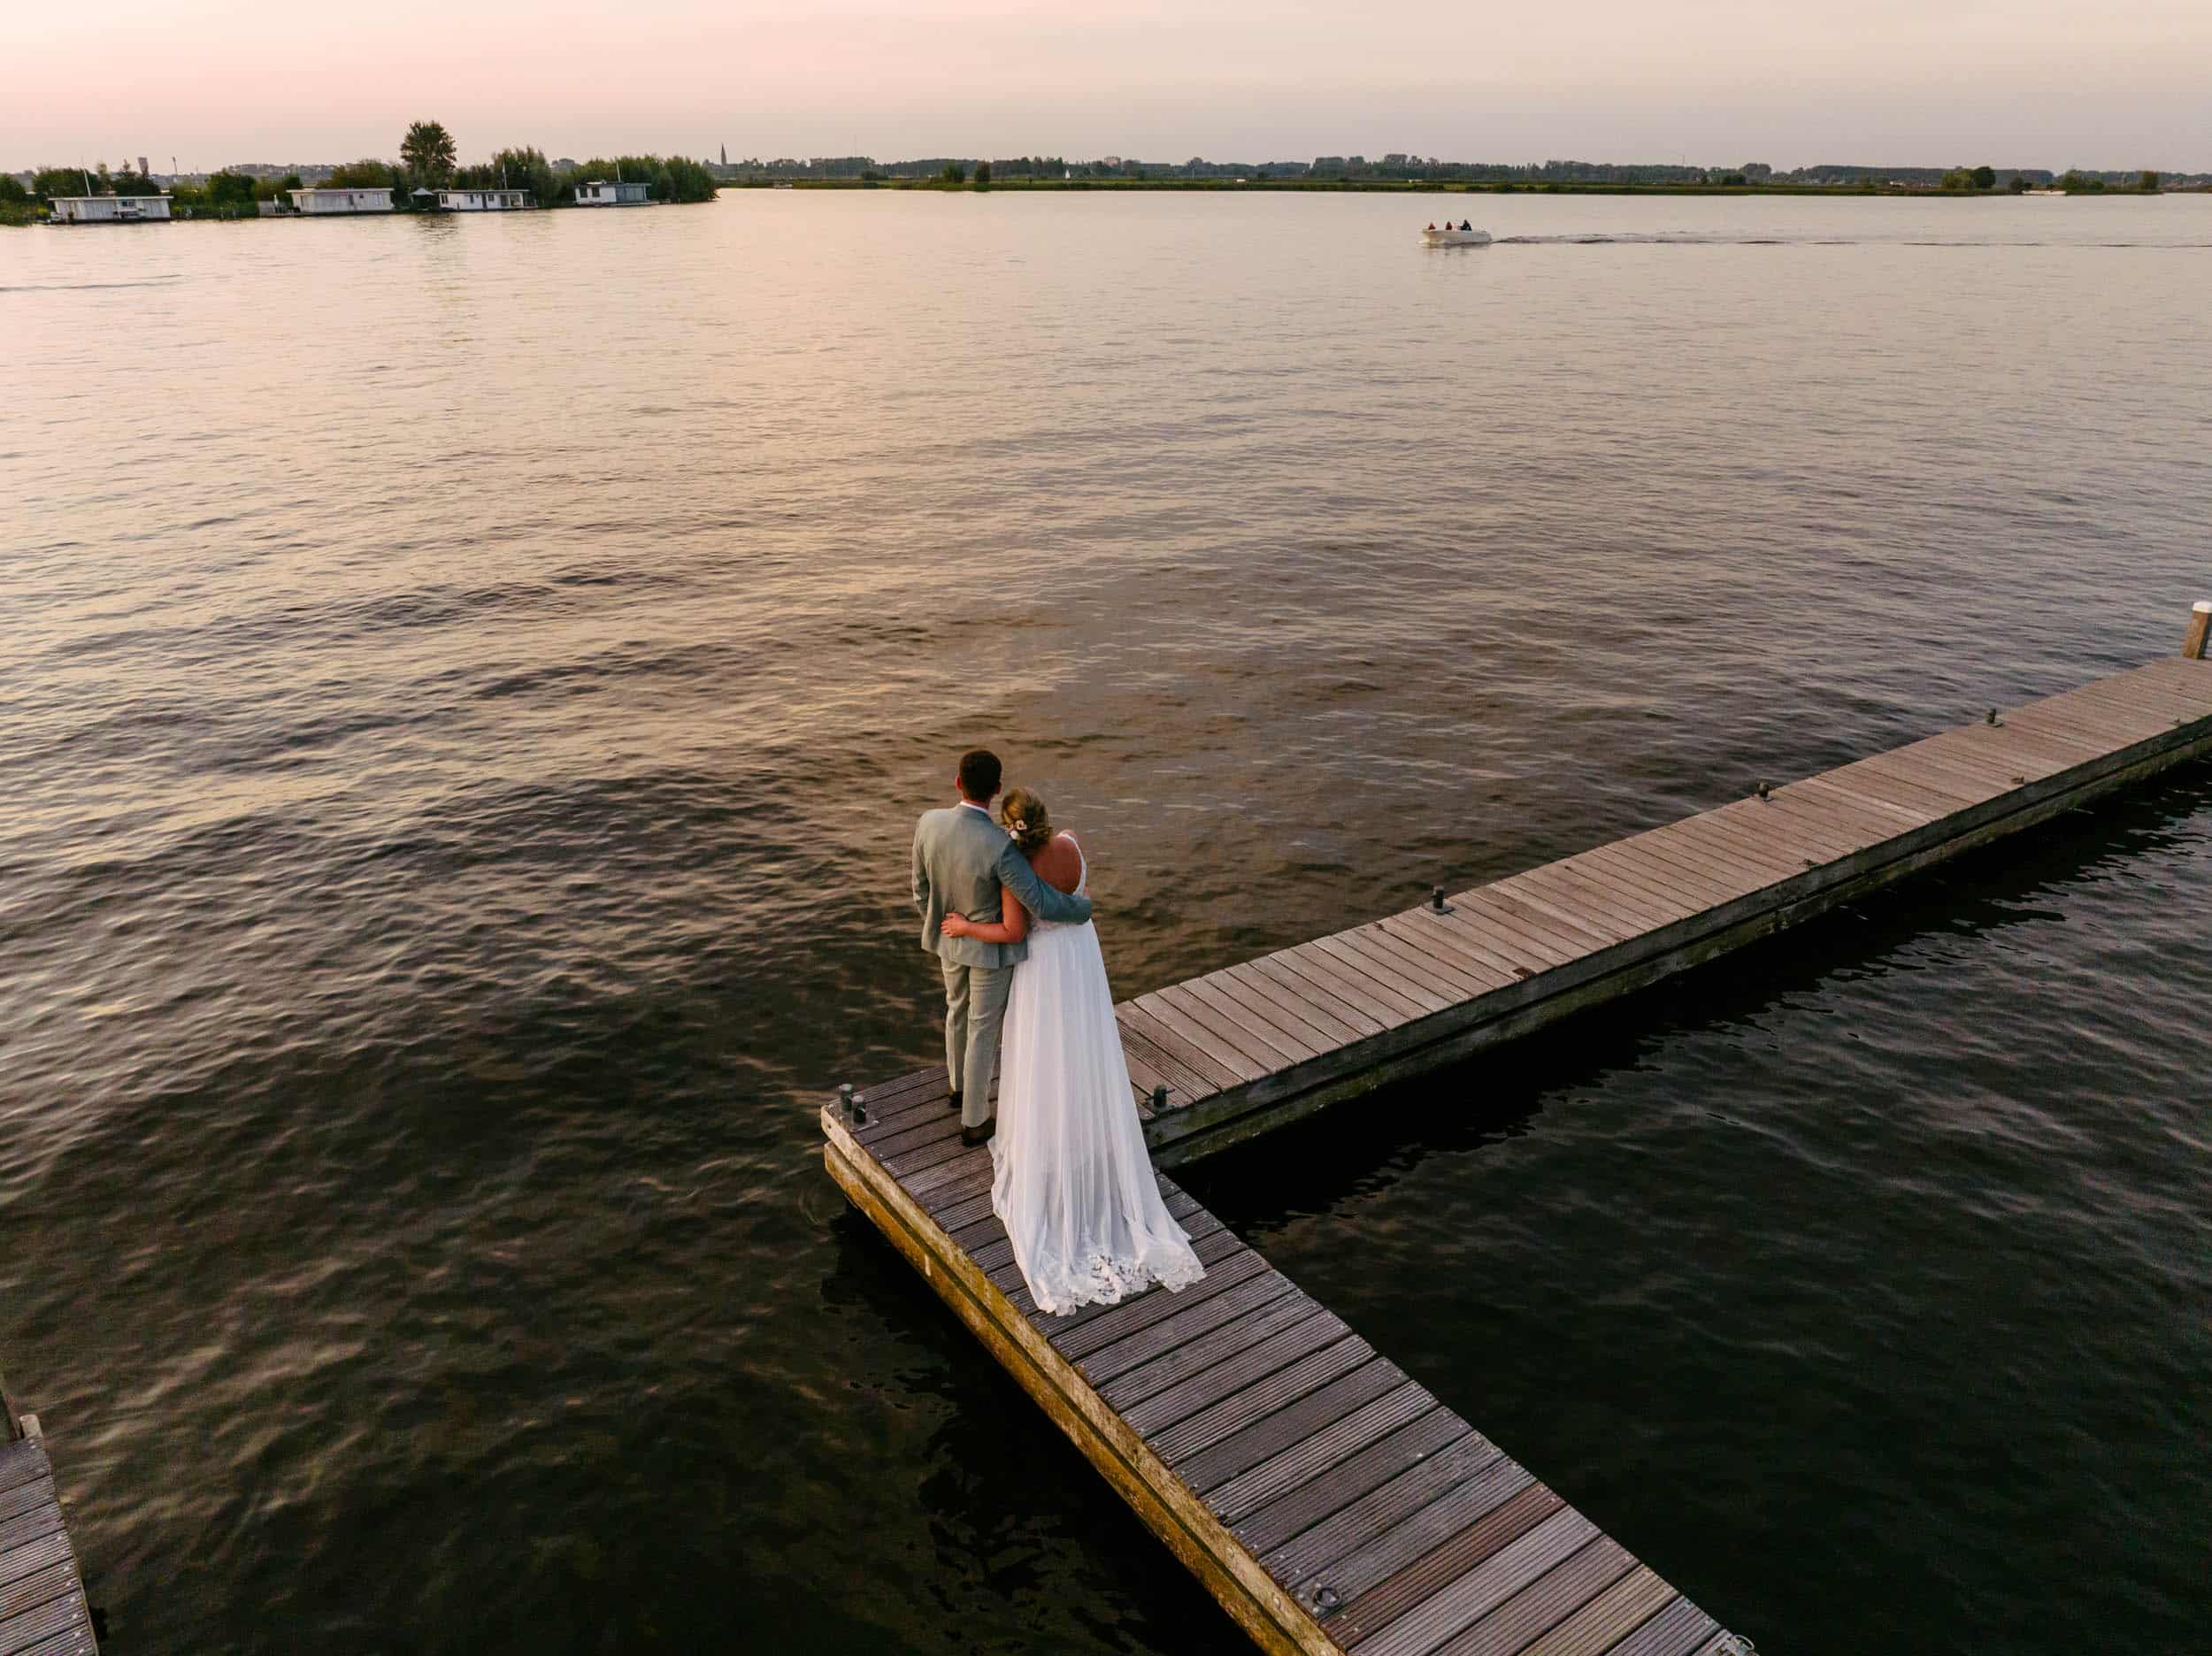 A Waterlust couple standing on a quay at sunset, captured by the Kaag Society.